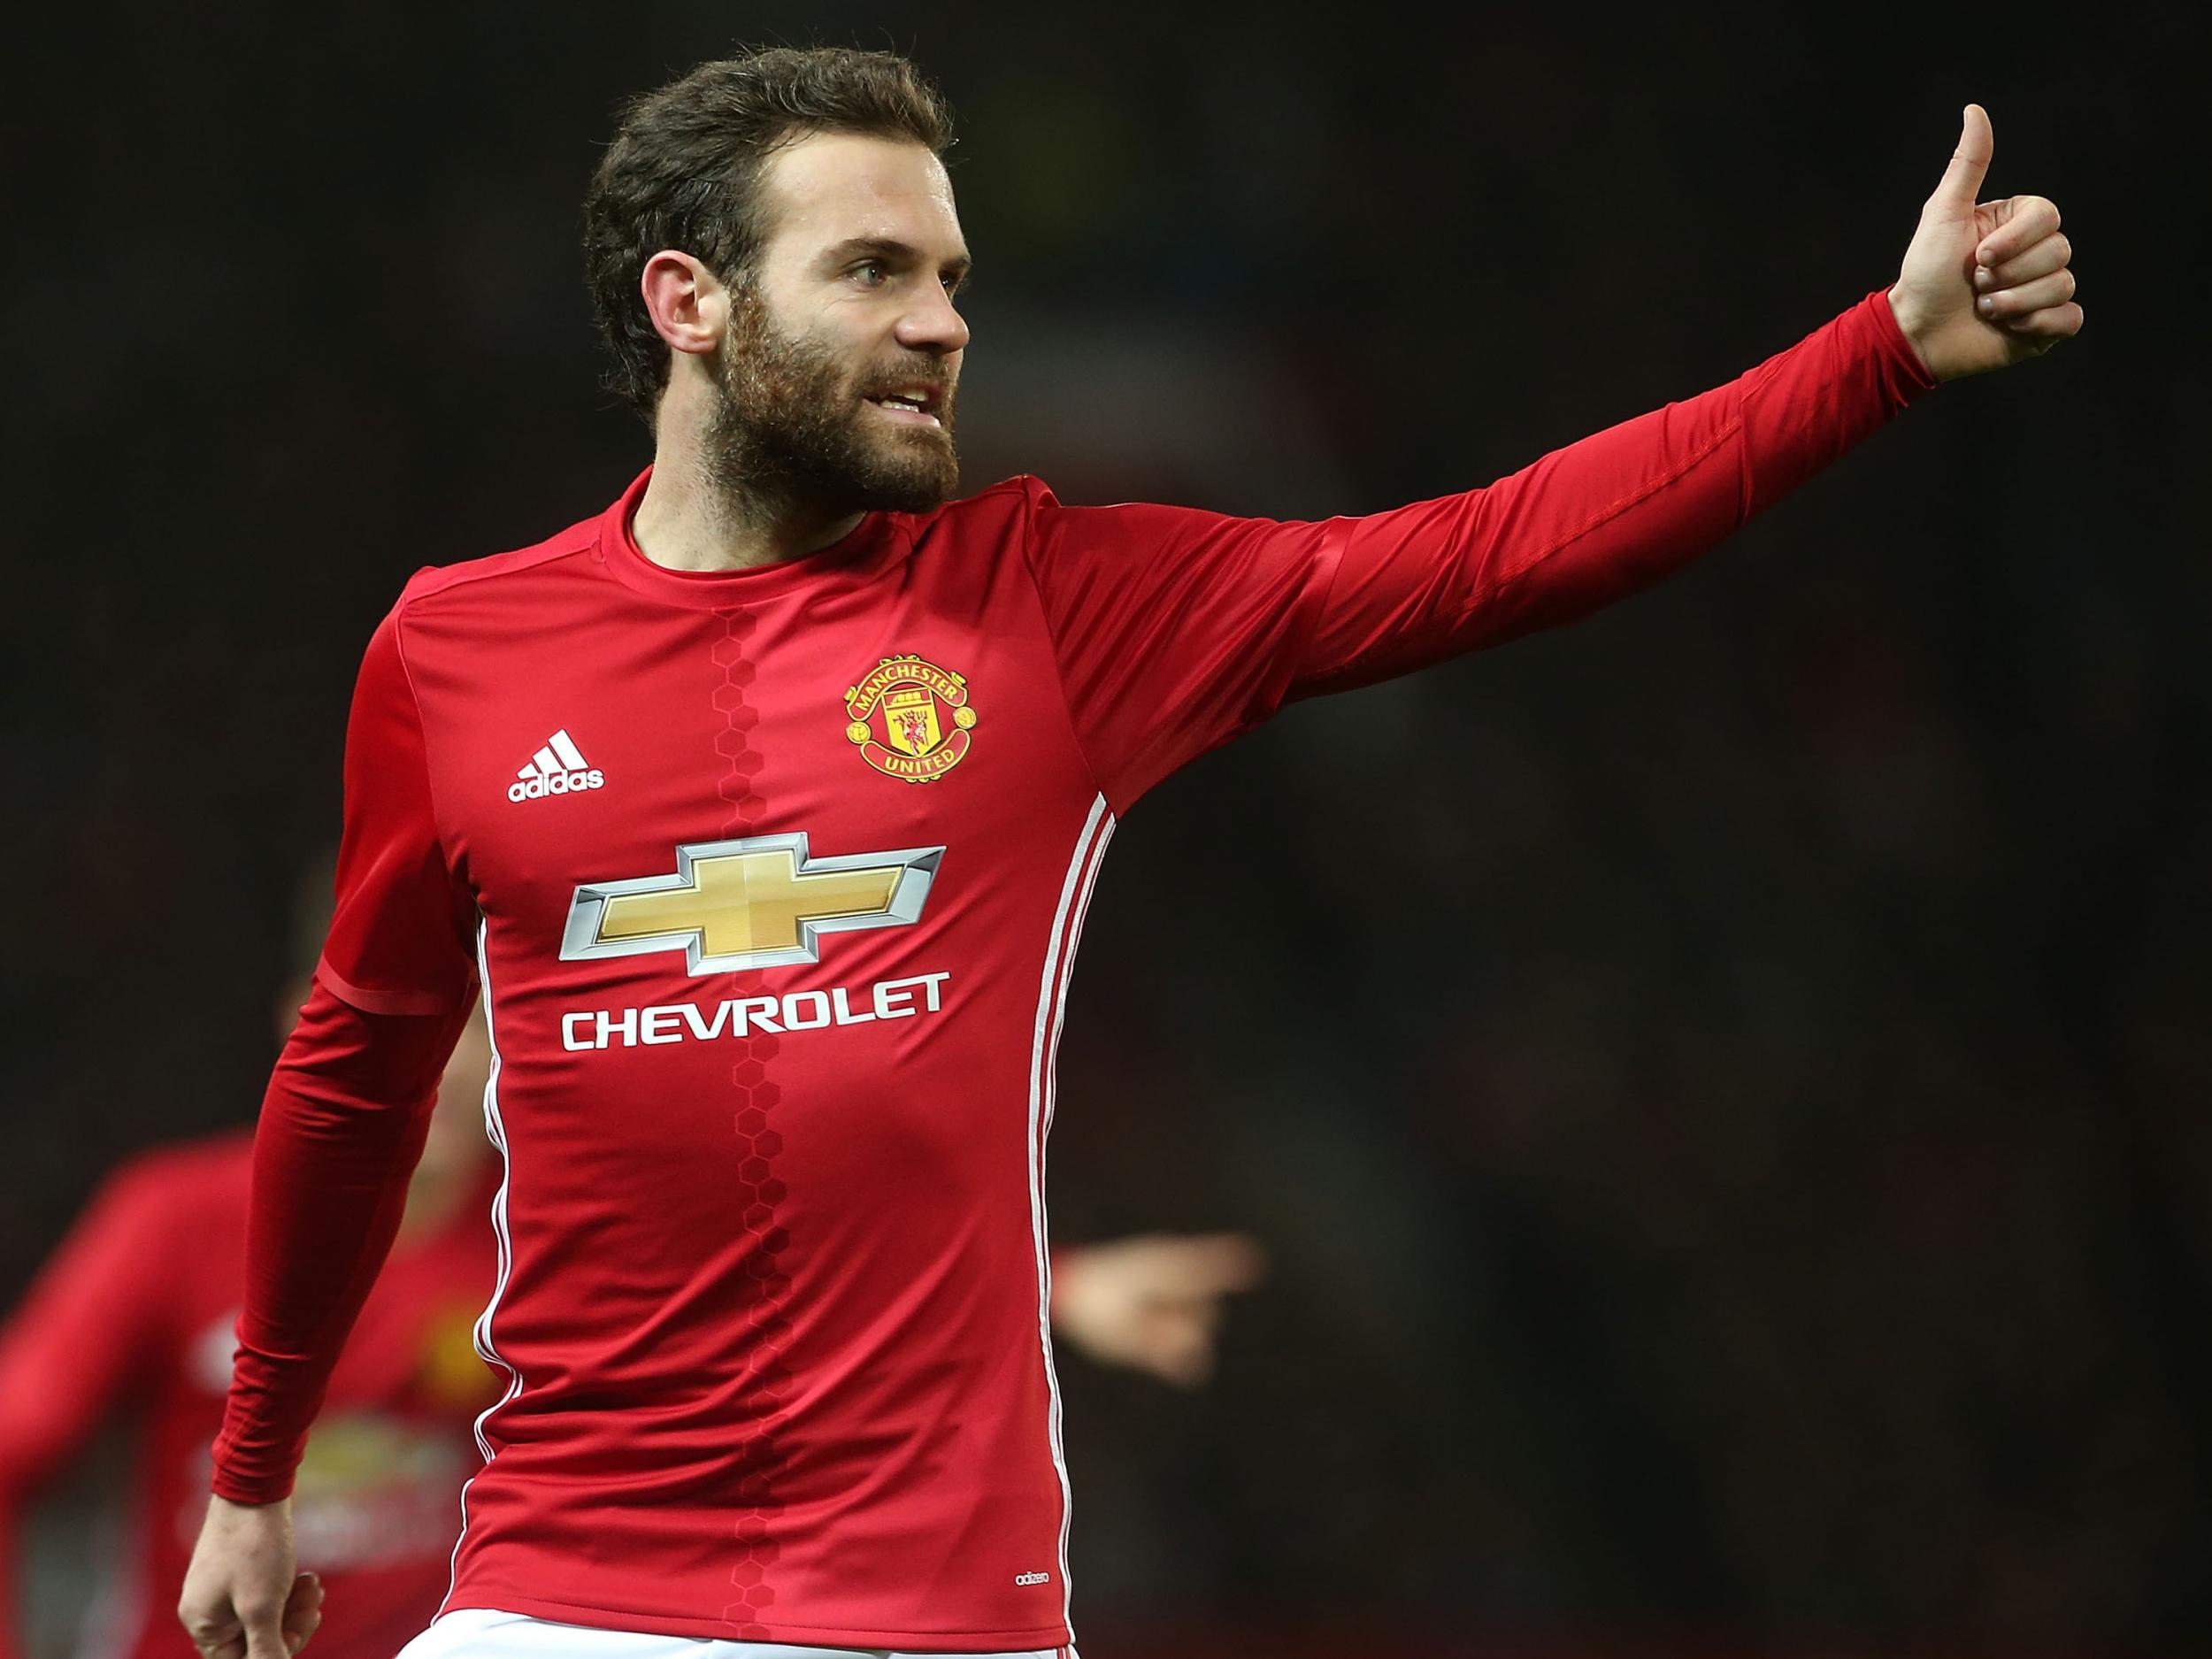 Juan Mata scored from close range to give United the lead